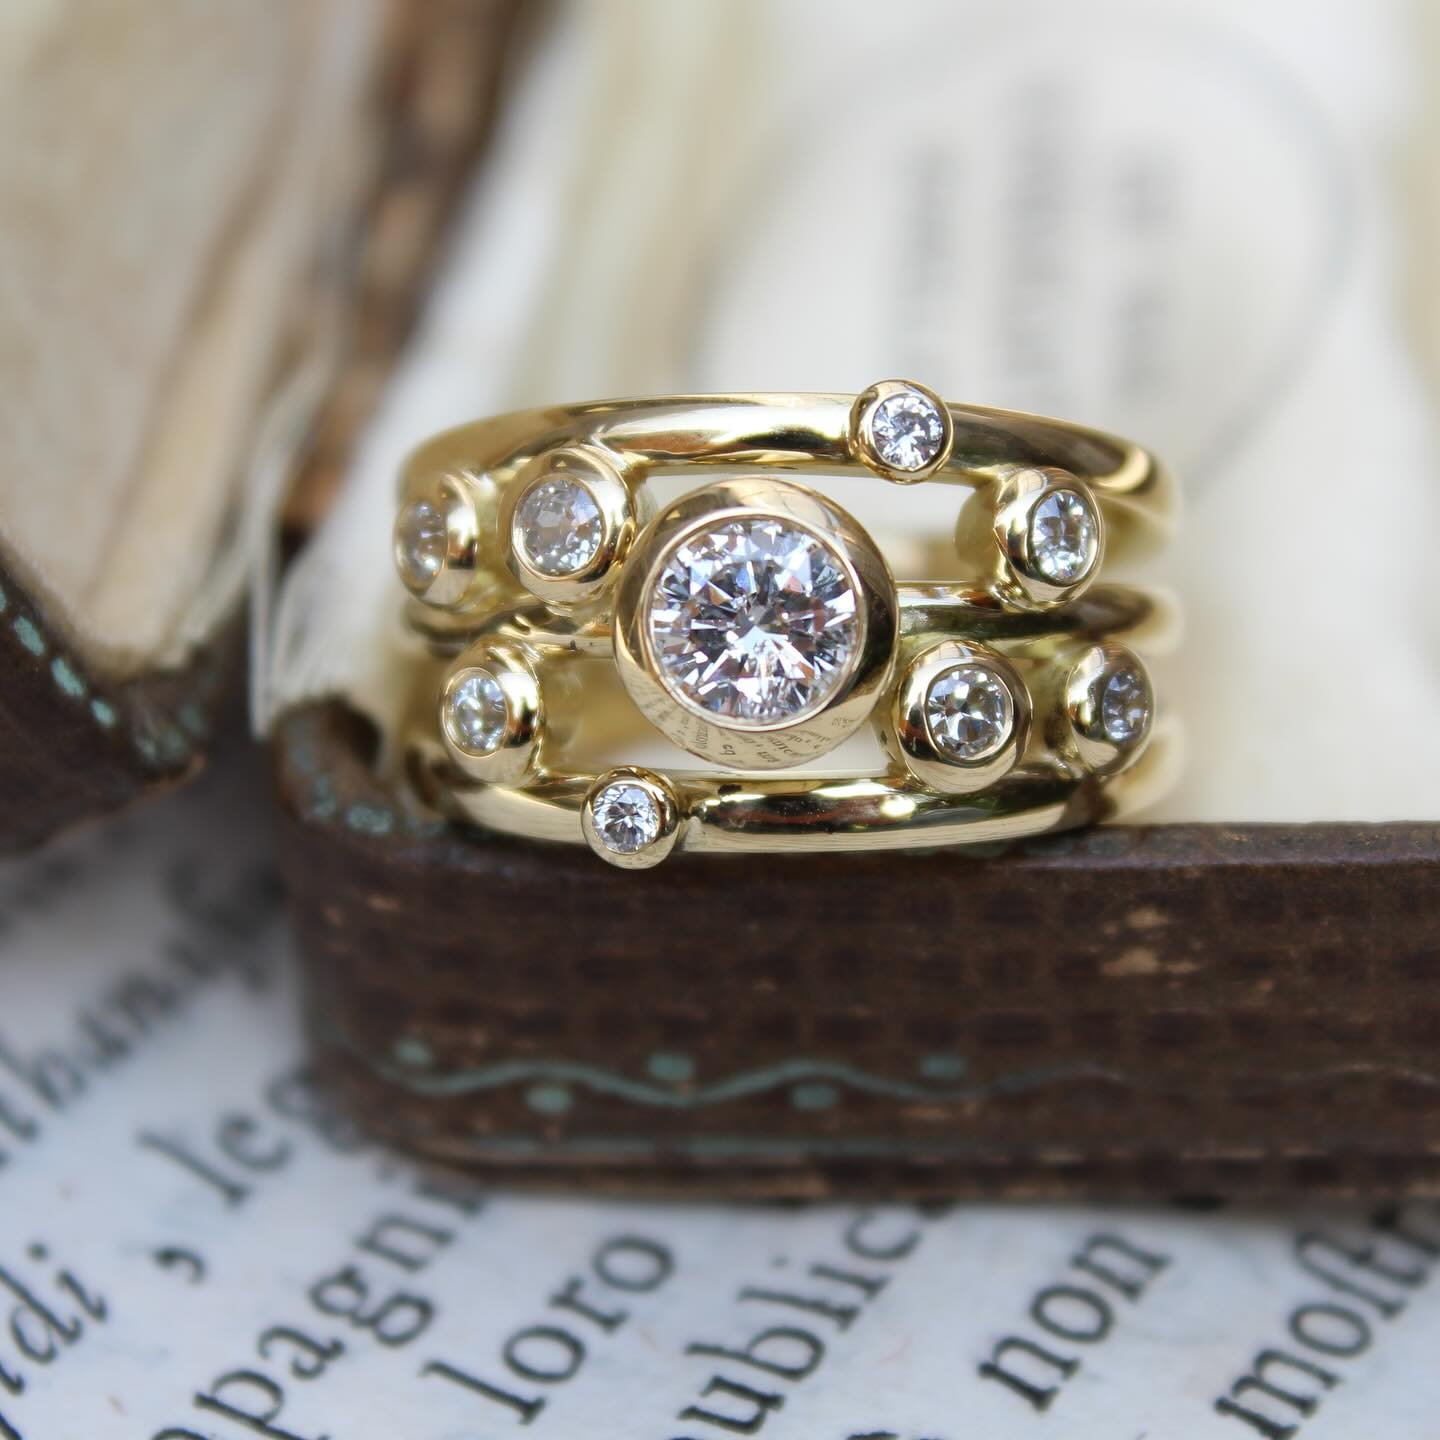 A bit of summer sparkle ✨
.
Provenance is important &hellip; this ring was created using sentimental family rings.  The gold was refined &amp; realloyed to 18ct yellow &amp; the small diamonds given a new lease of life in new settings. The central di